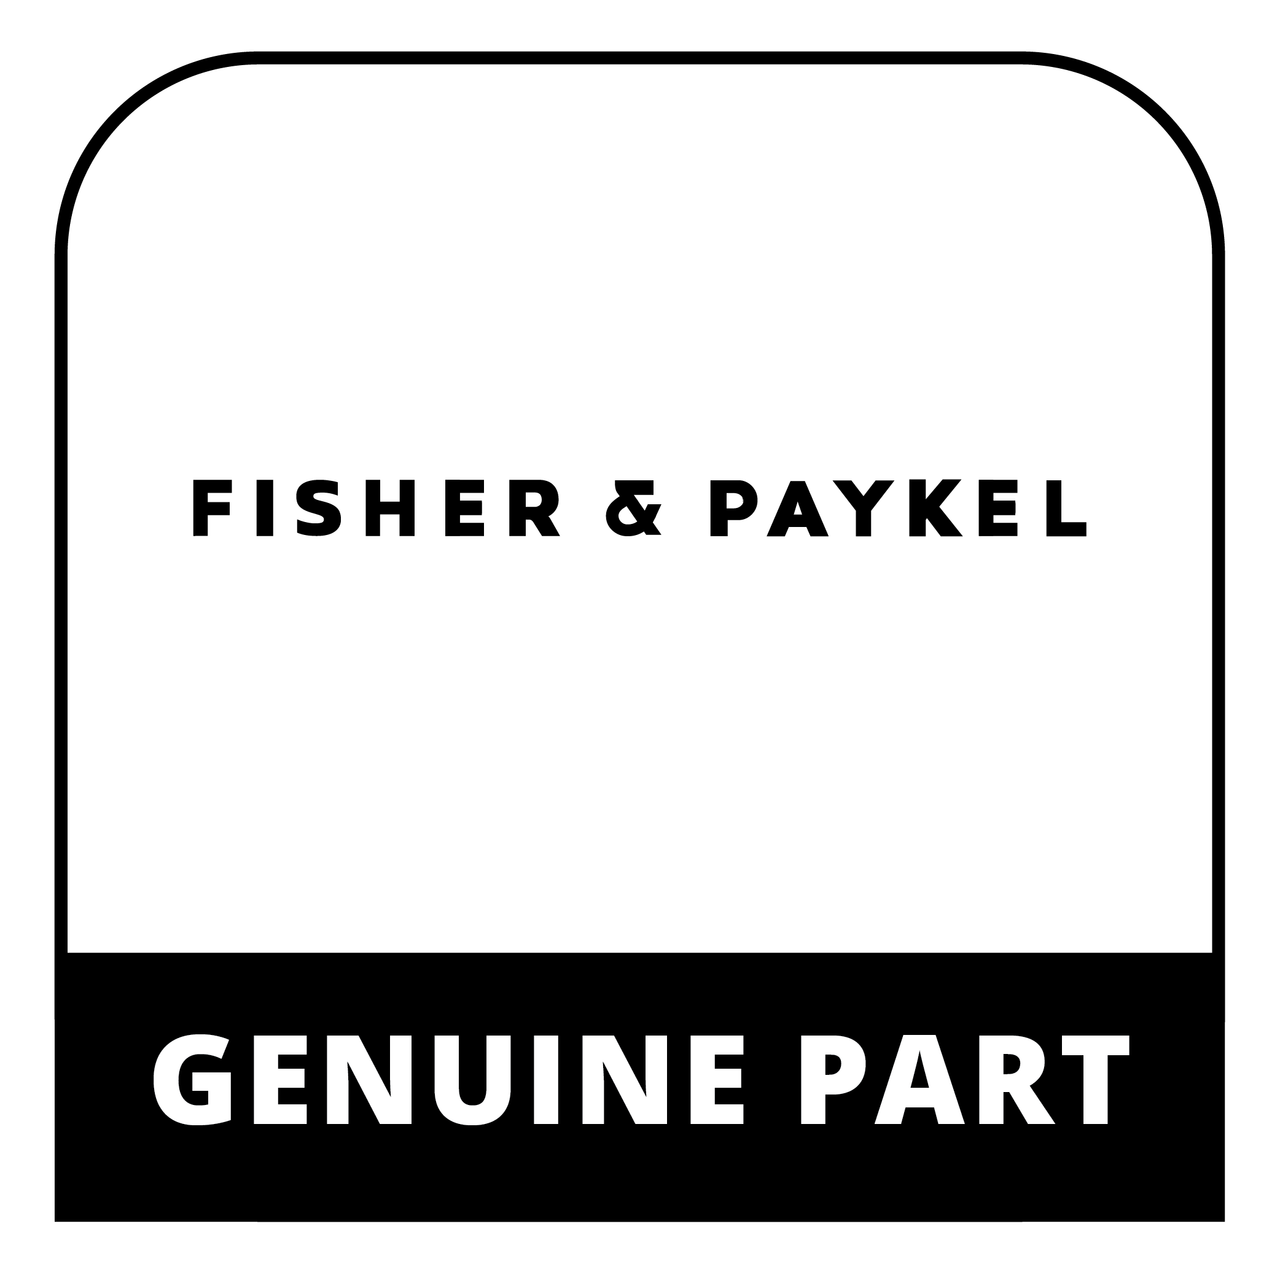 Fisher & Paykel 575597 - Panel Oven Top Rh Graphite - Genuine Fisher & Paykel (DCS) Part